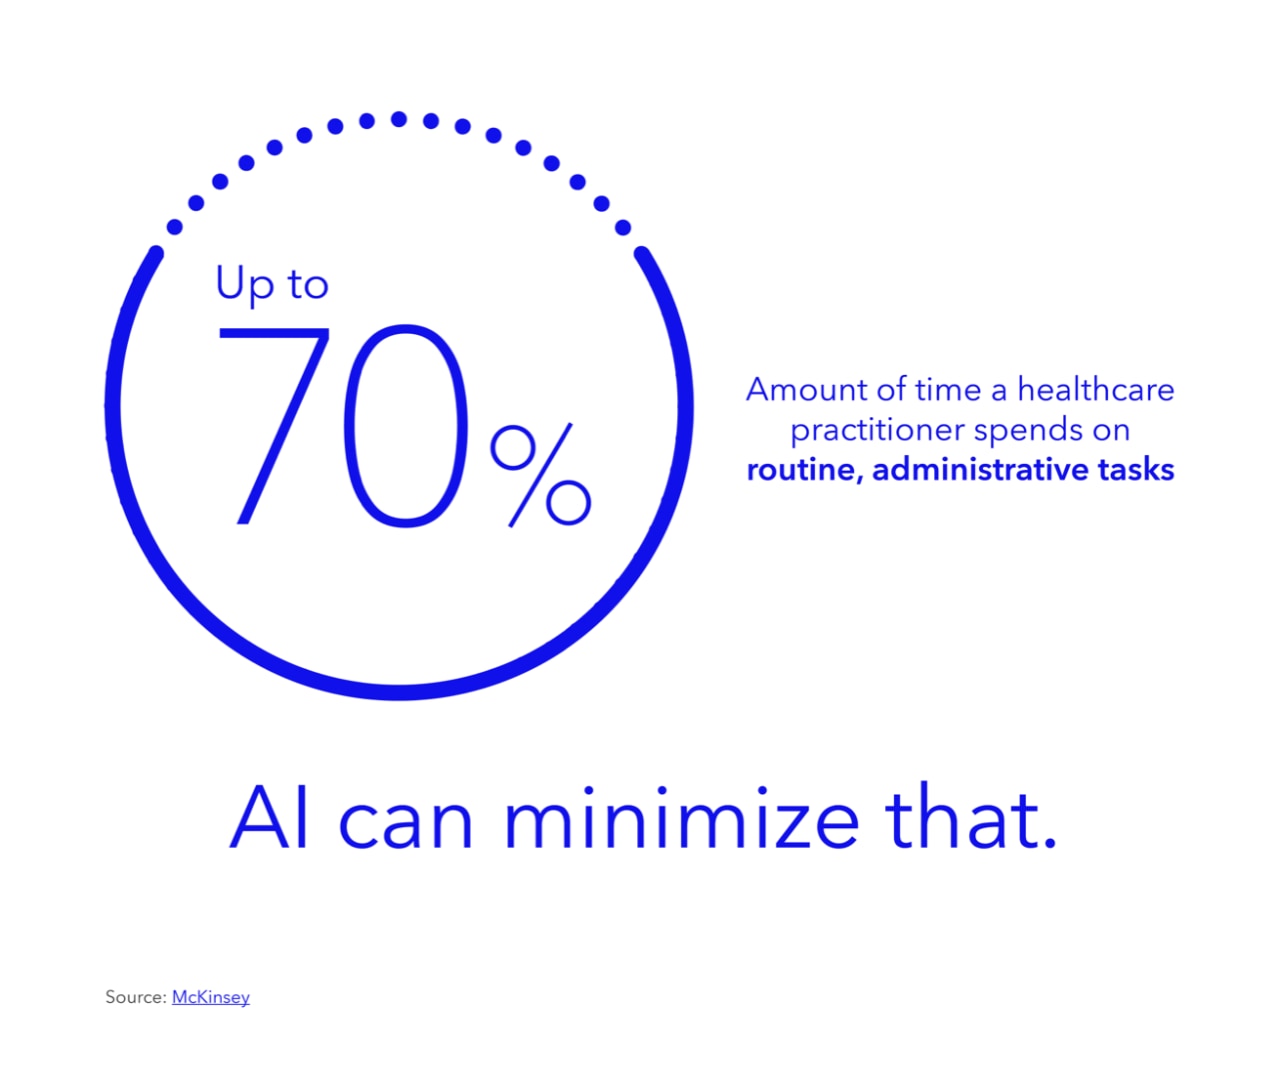 Up to 70% -- the amount of time a healthcare practitioner spends on routine, administrative tasks. AI can minimize that.